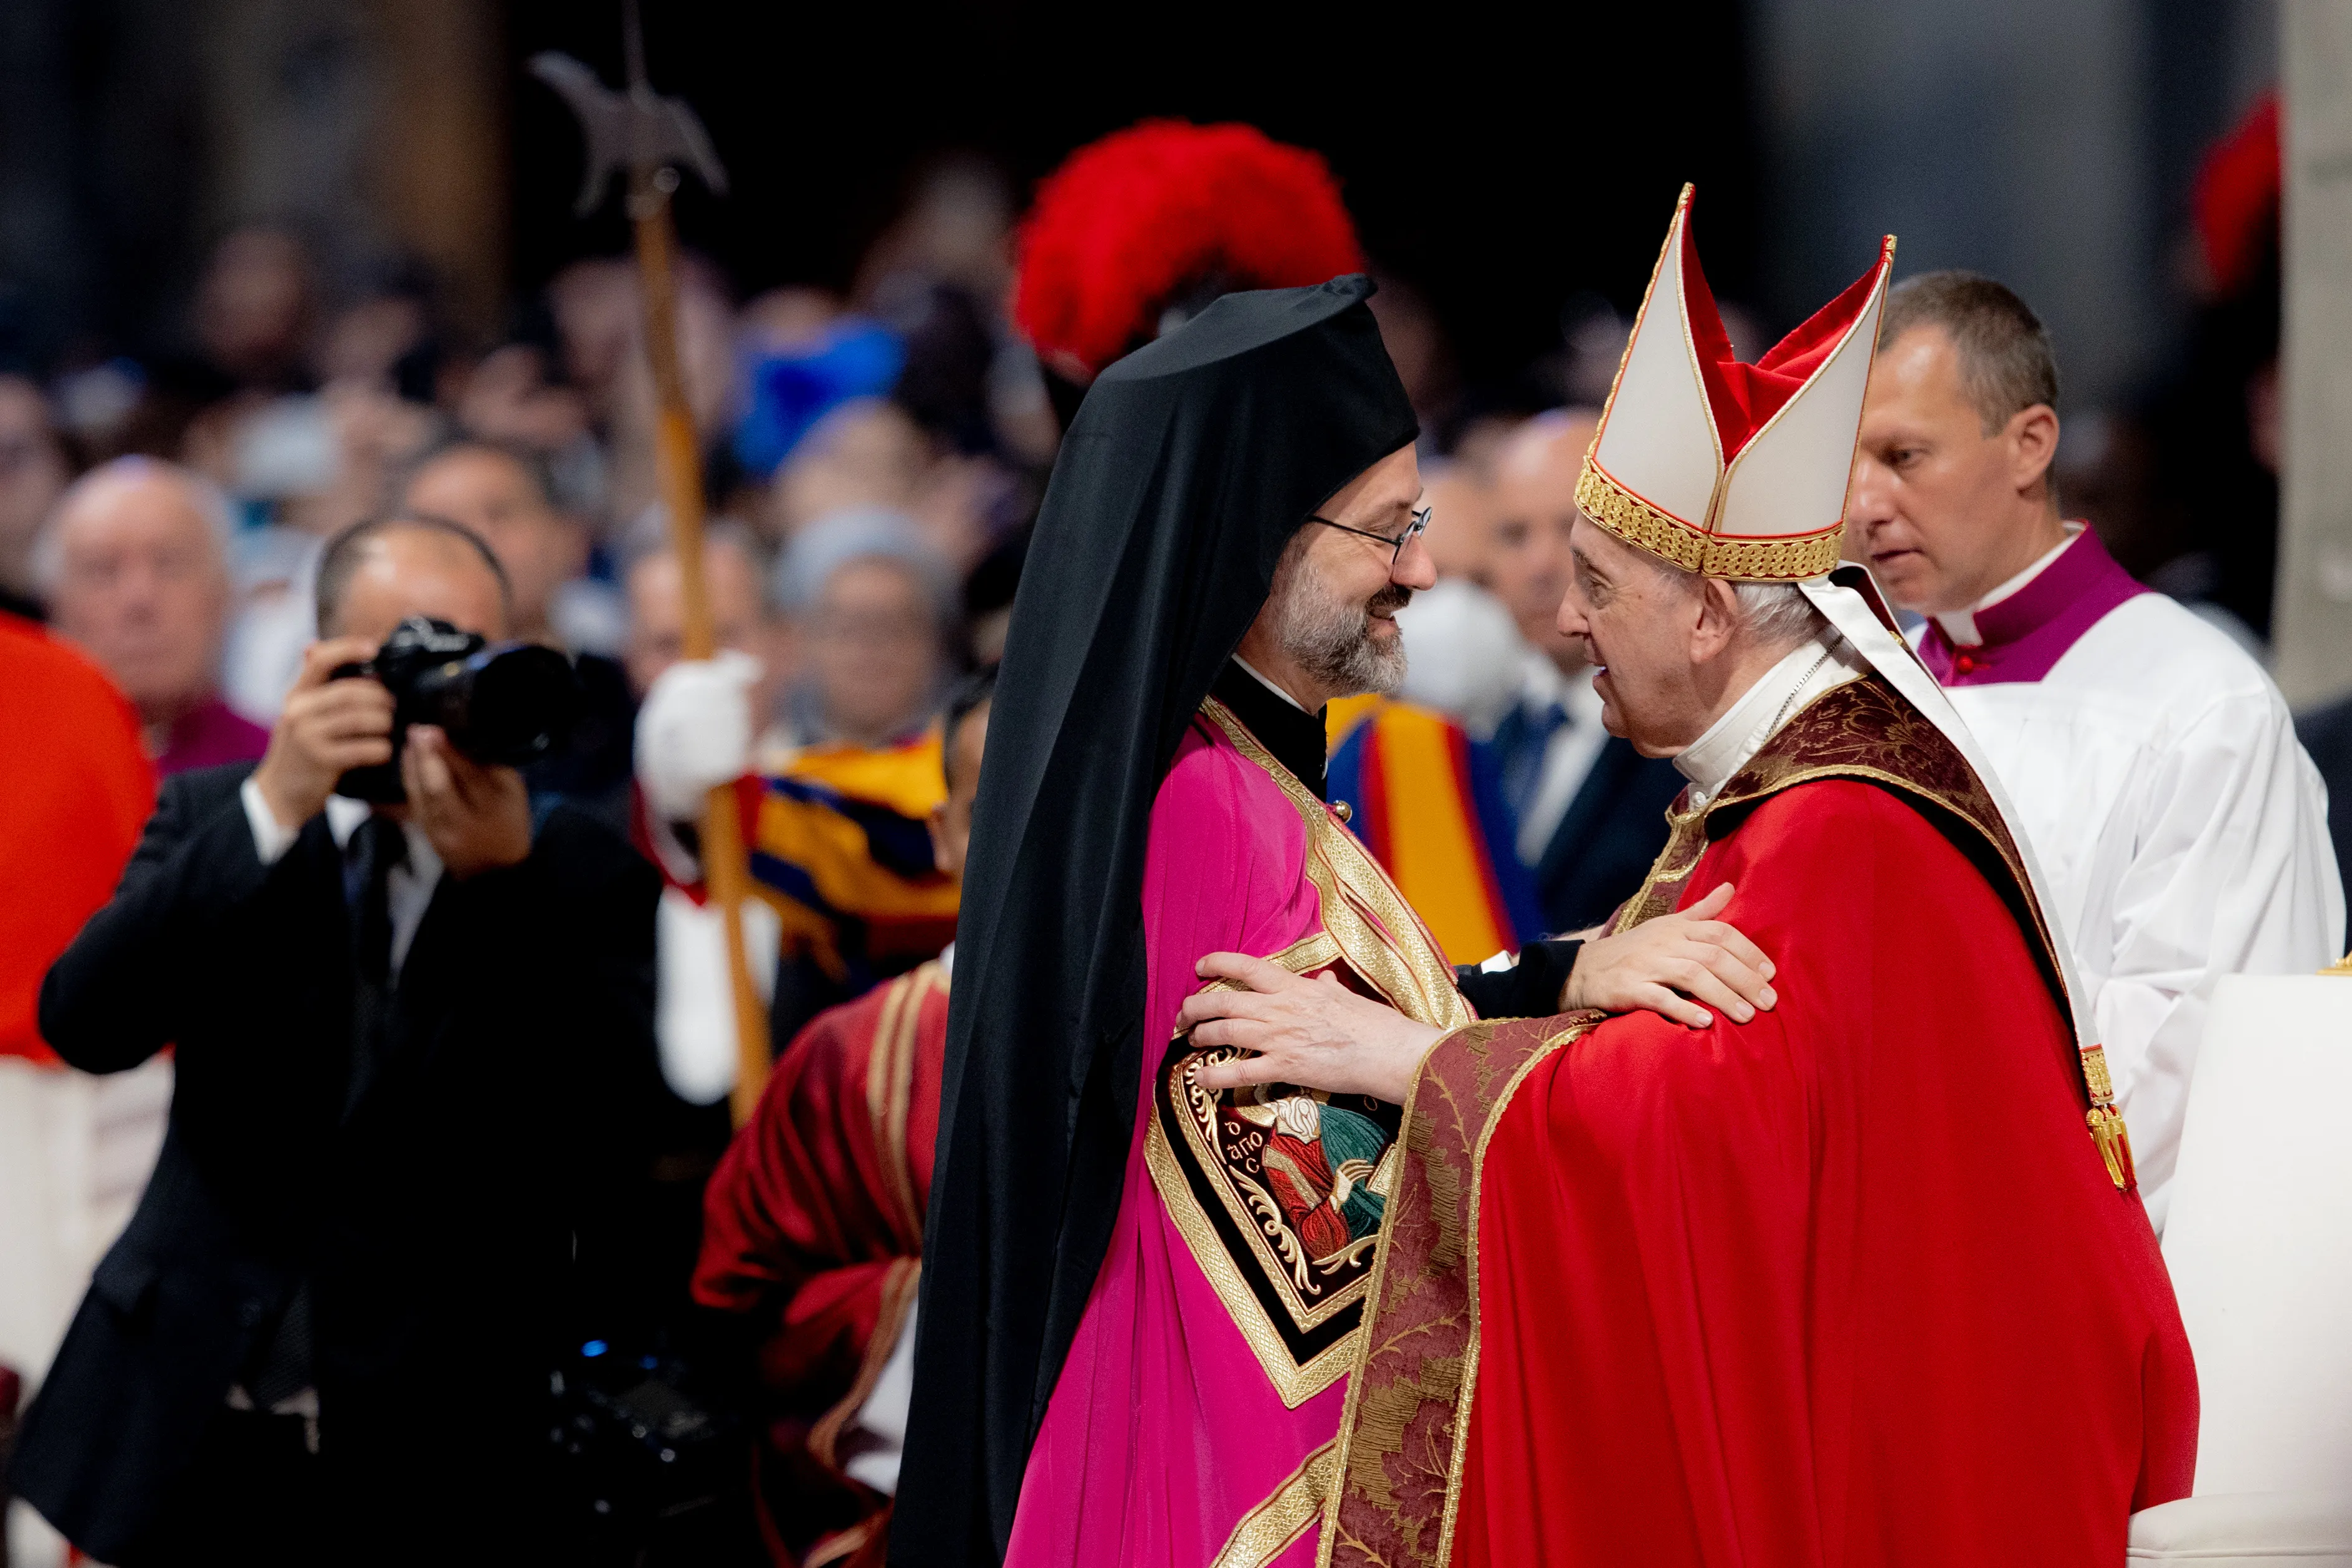 The ceremony on June 29, 2022, was attended by members of the Delegation of the Ecumenical Patriarchate of Constantinople and Pope Francis also blessed the pallia for the metropolitan archbishops appointed in the last year. Daniel Ibañez/CNA